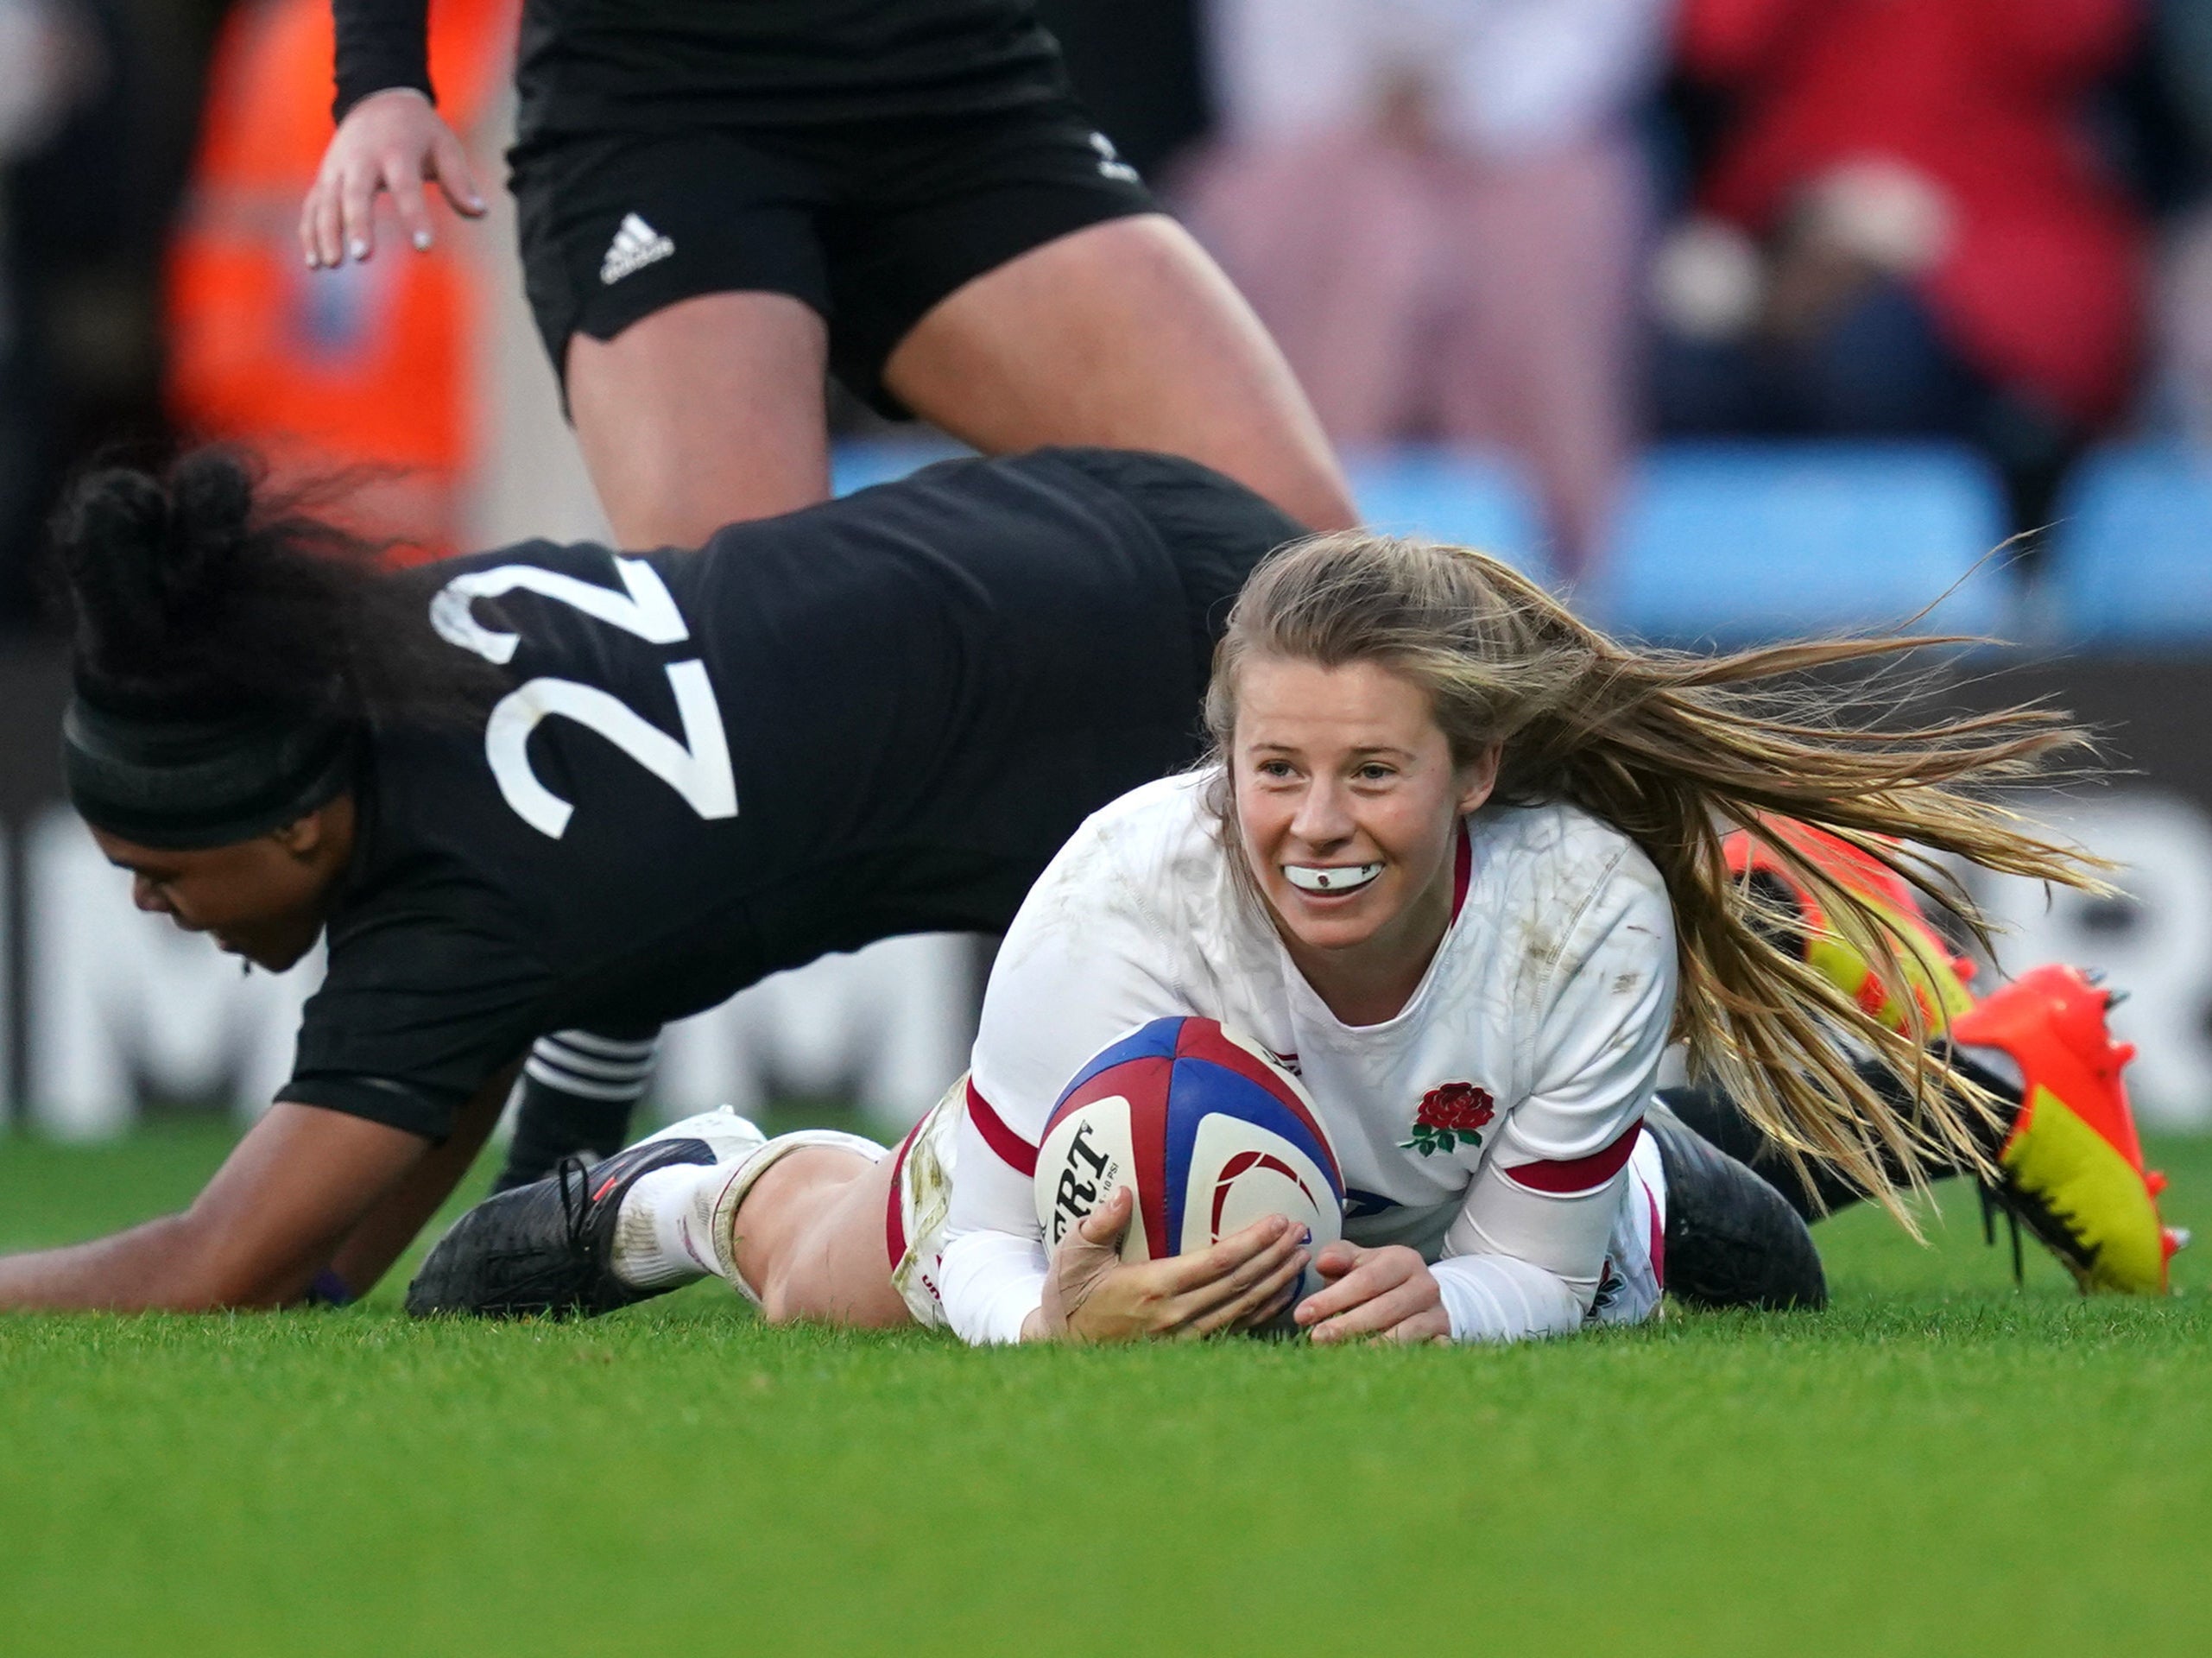 Zoe Harrison scores a try during the Women's Autumn International match at Sandy Park